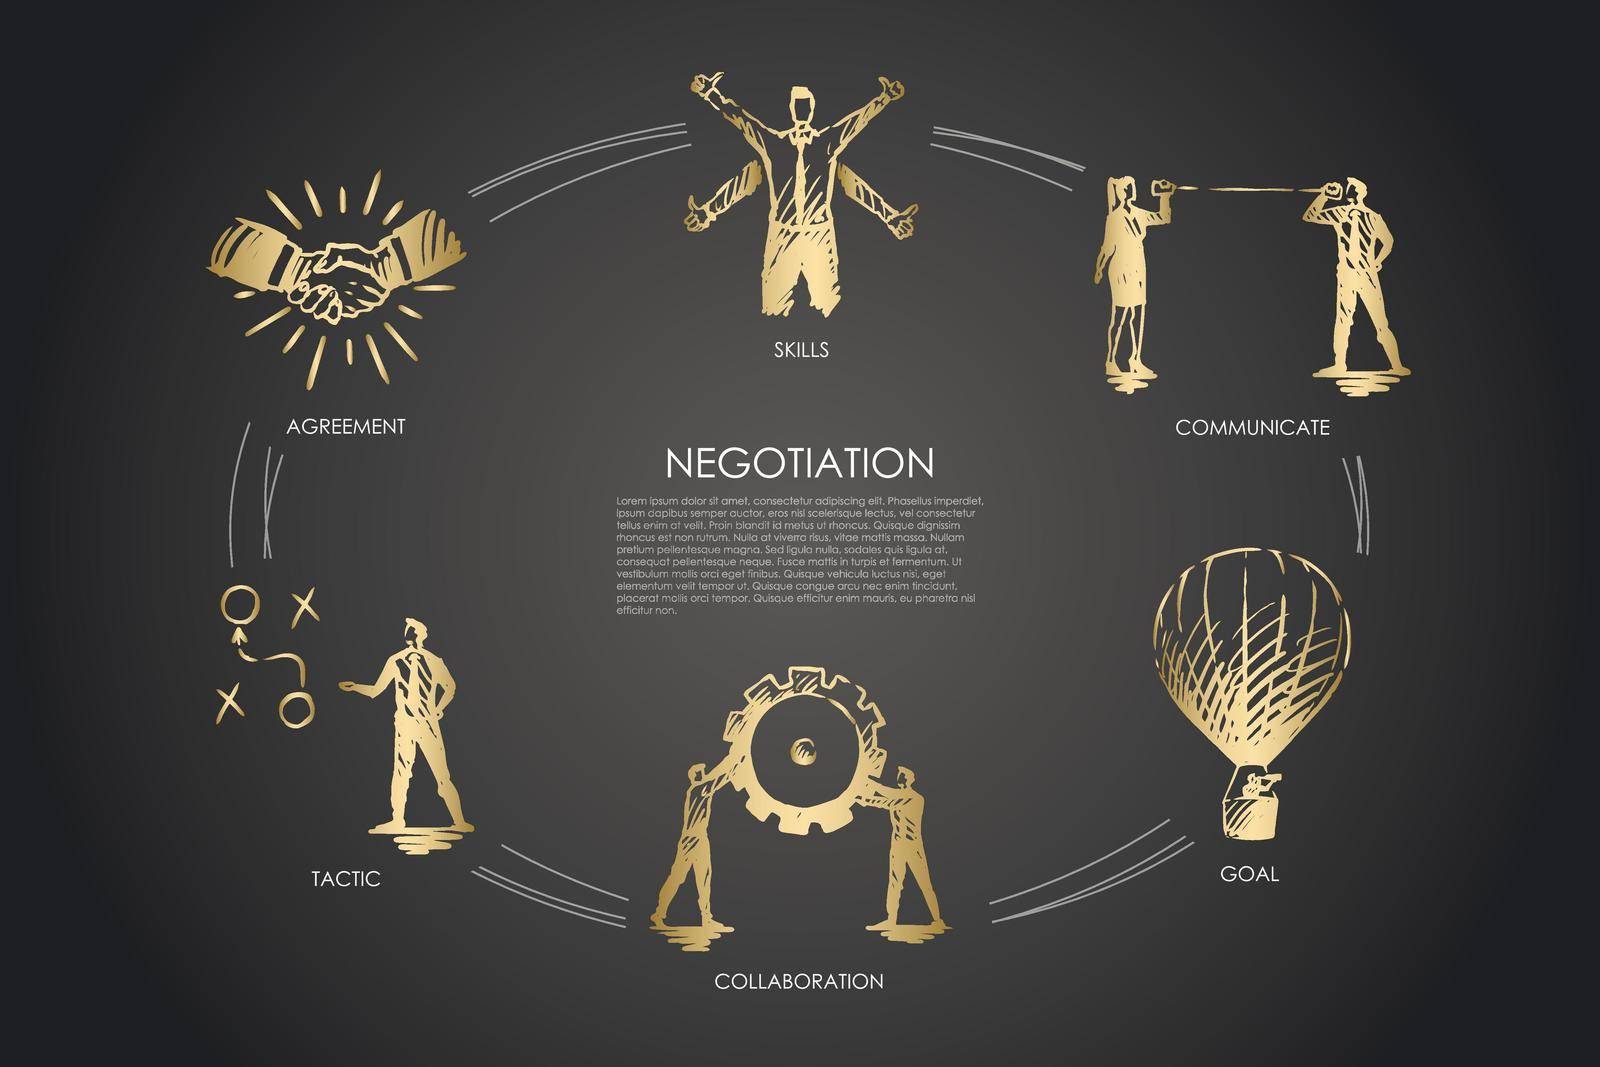 Negotiation - skills, goal, tactic, communicate, collaboration set concept. Hand drawn isolated vector.